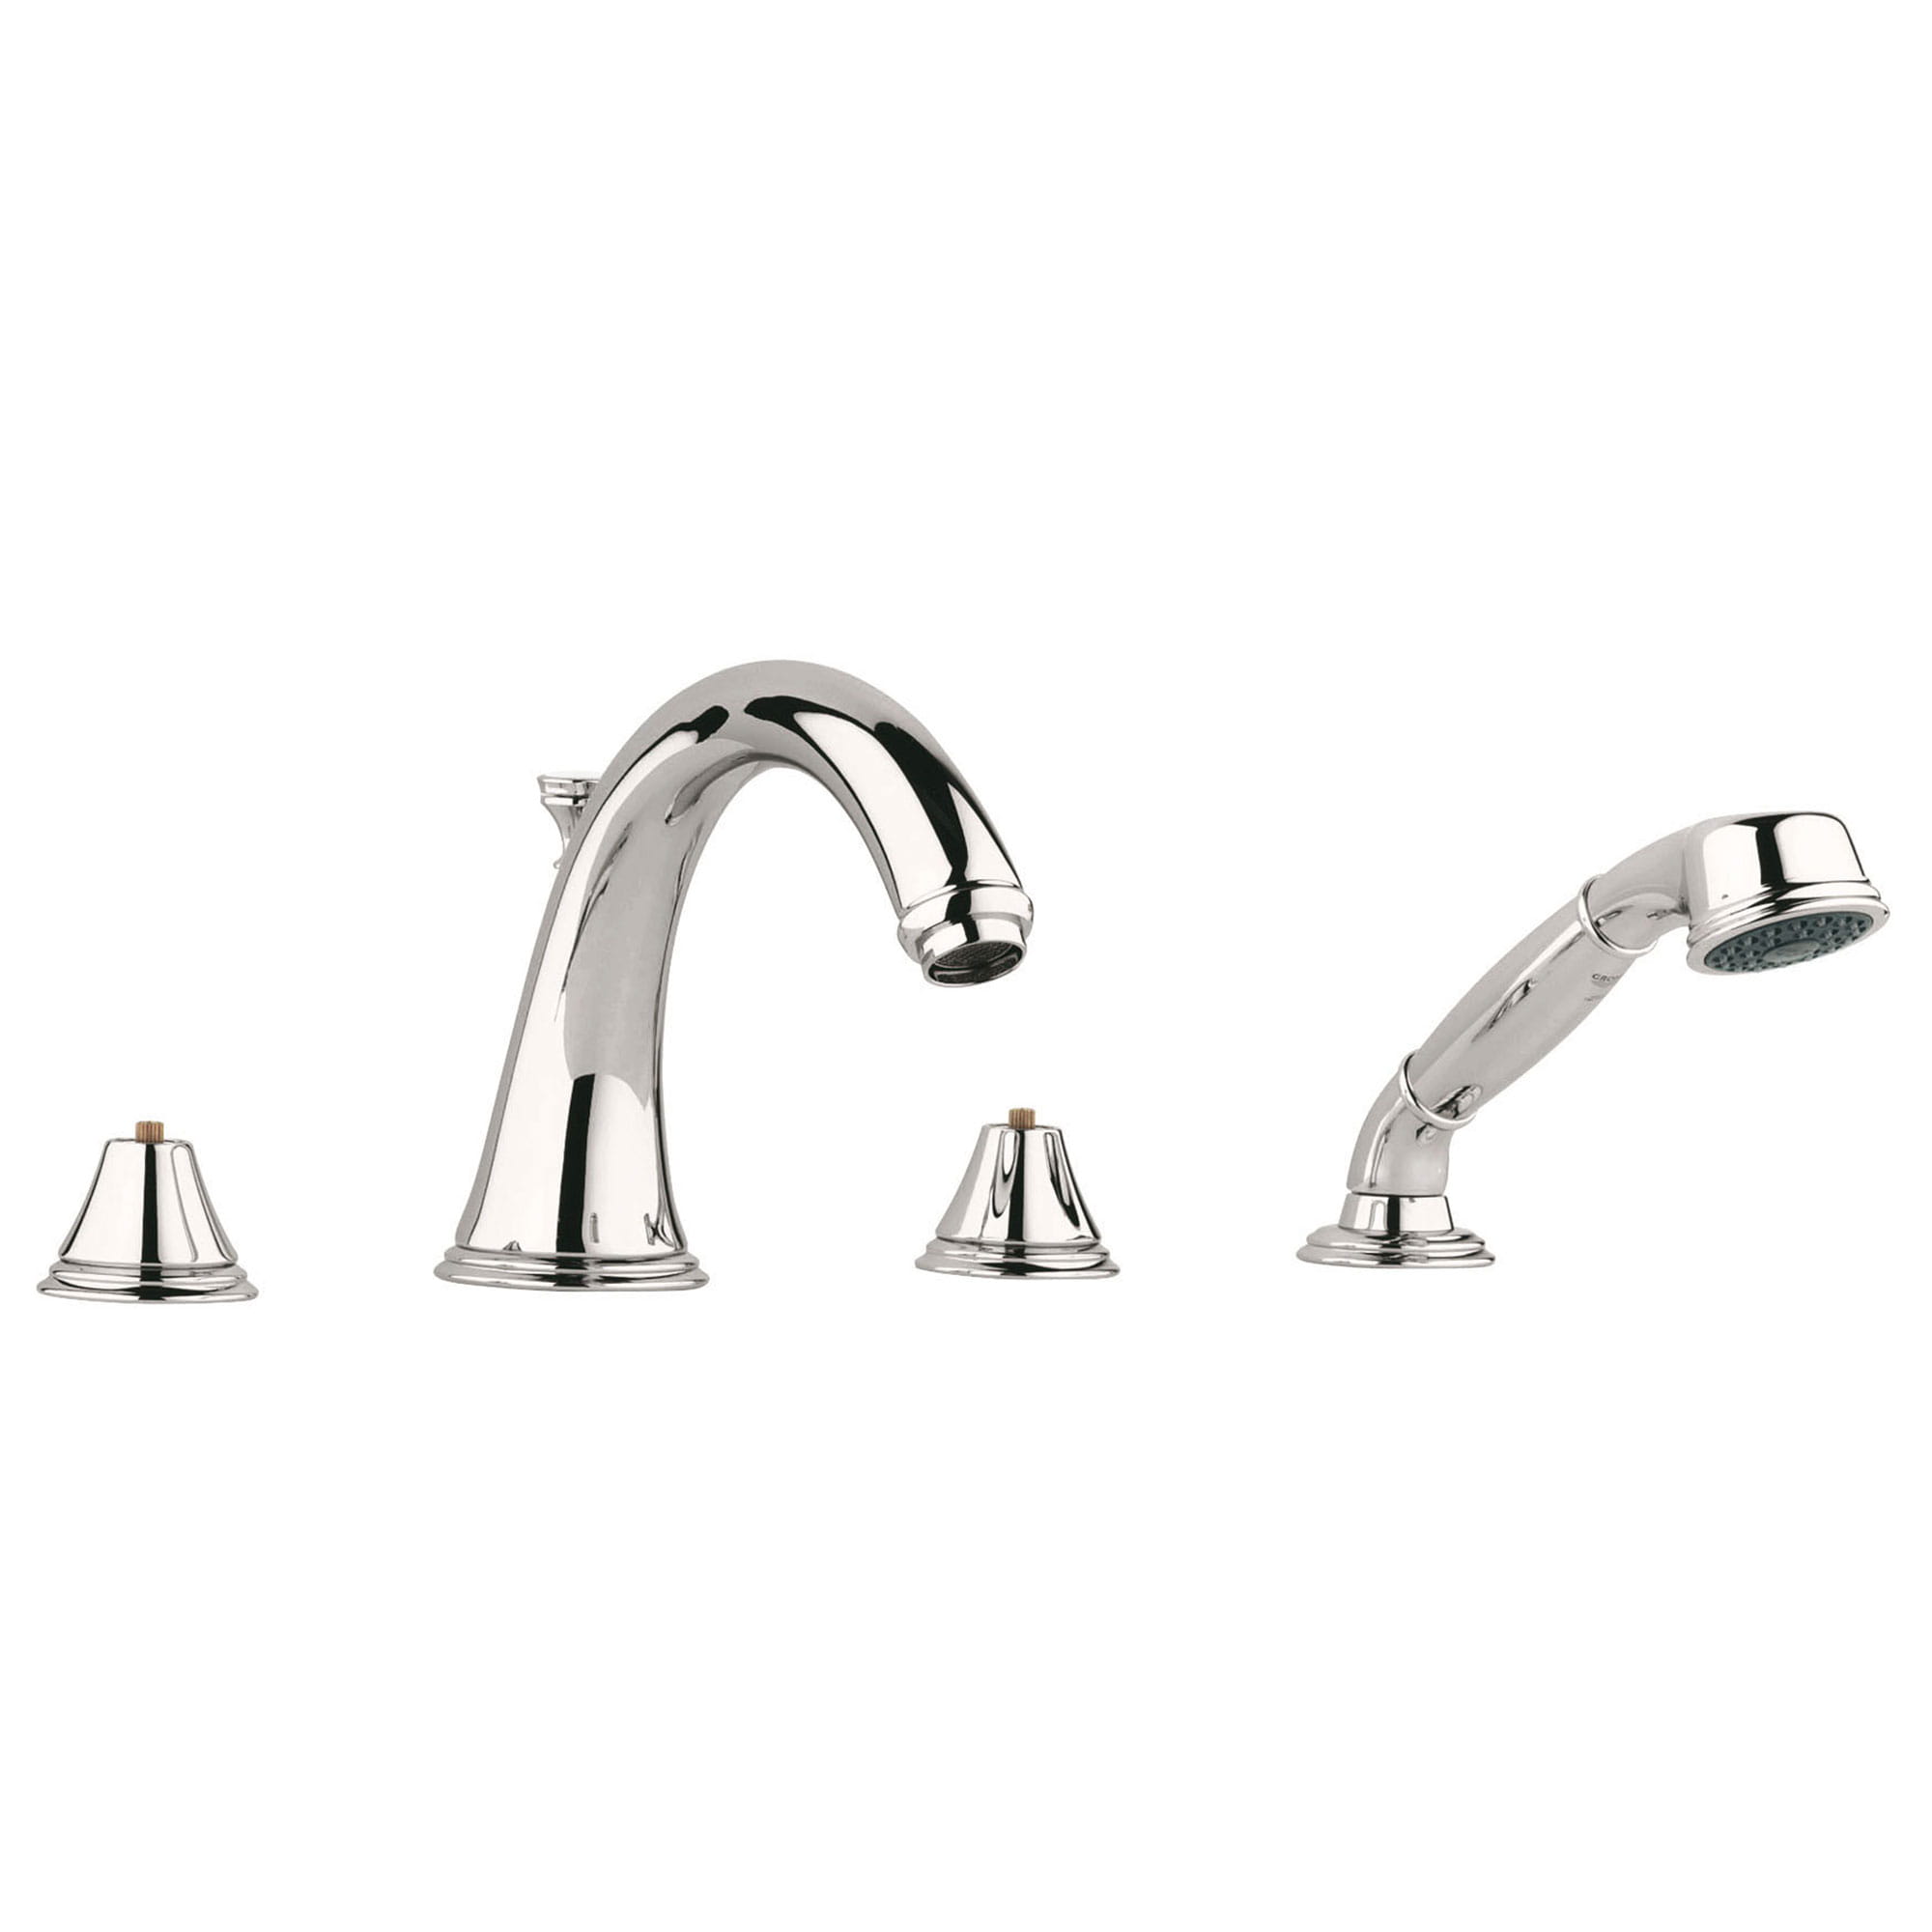 Roman Tub Filler With 25 GPM Personal Hand Shower GROHE POLISHED NICKEL